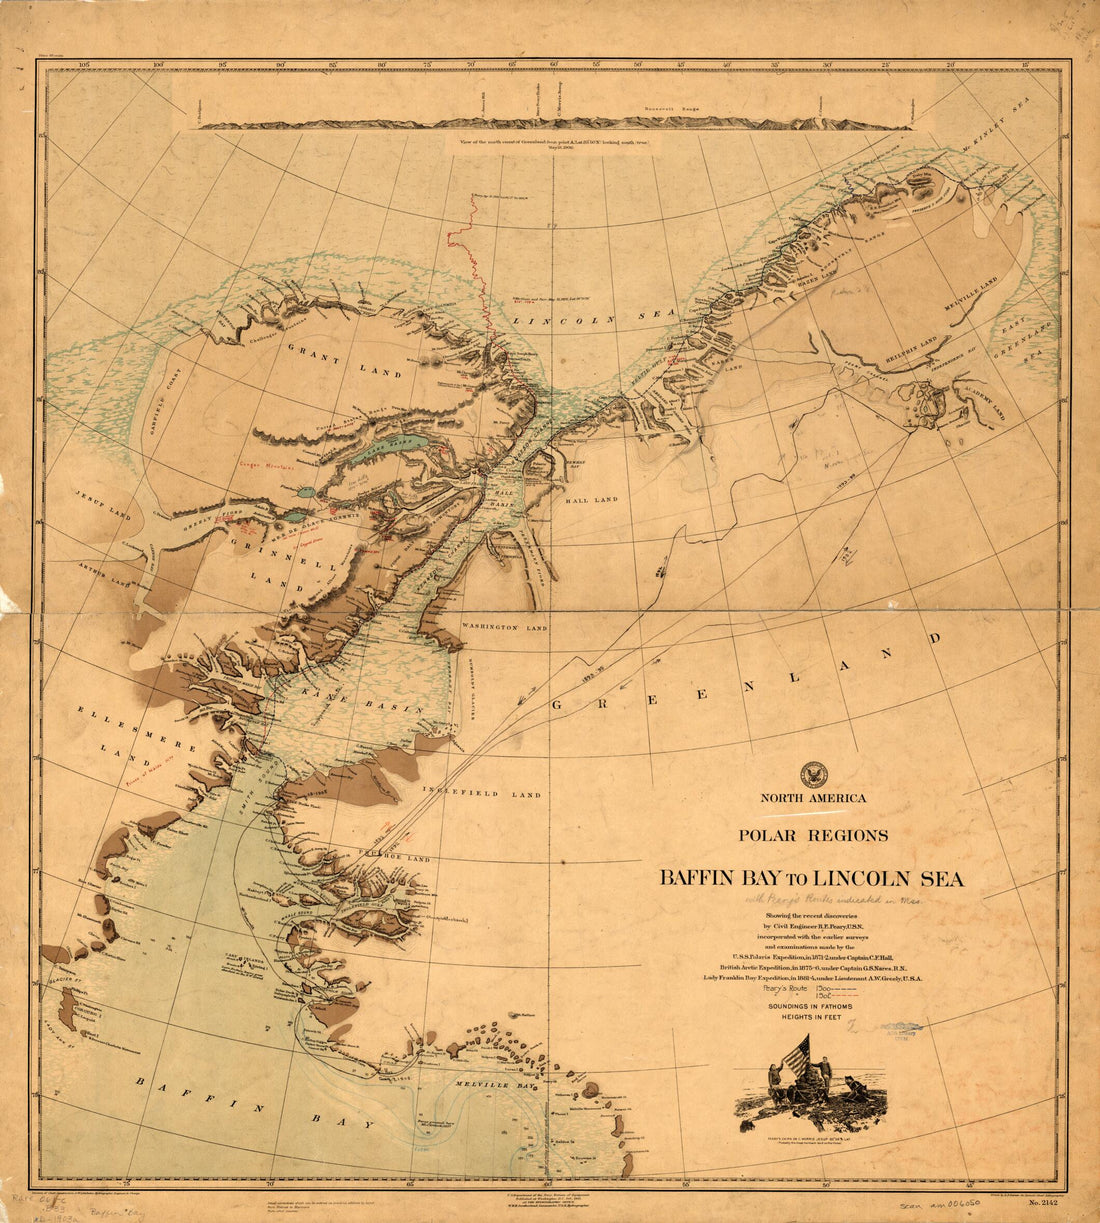 This old map of North America Polar Regions, Baffin Bay to Lincoln Sea. (North America Polar Regions Baffin Bay to Lincoln Sea) from 1903 was created by R. F. Barnes, Gregor Noetzel, William Henry Hudson Southerland,  United States. Hydrographic Office. Division of Chart Construction in 1903